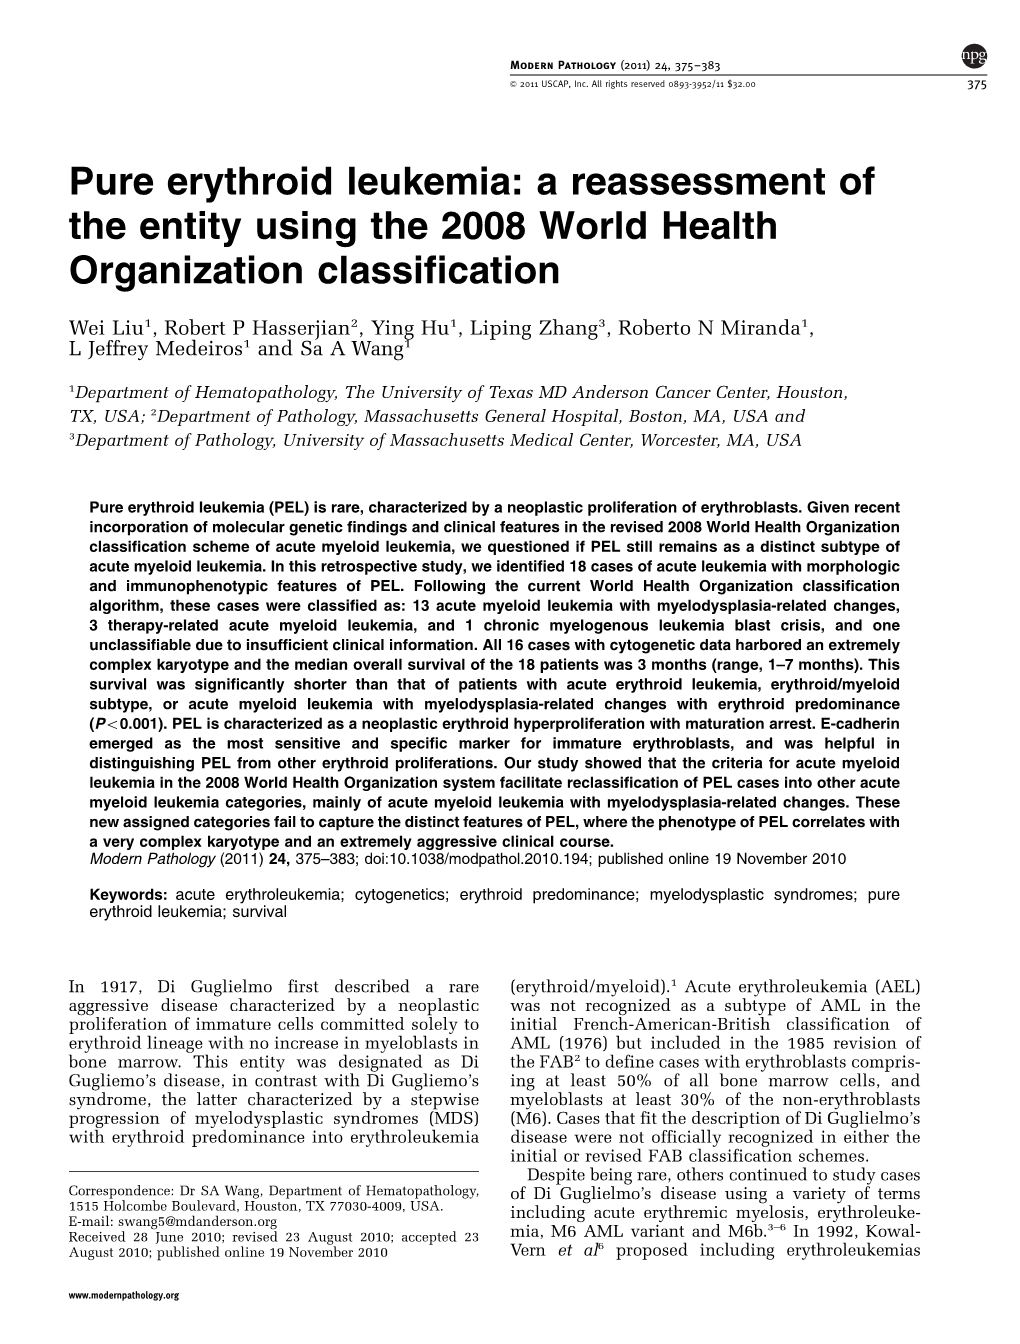 Pure Erythroid Leukemia: a Reassessment of the Entity Using the 2008 World Health Organization Classification